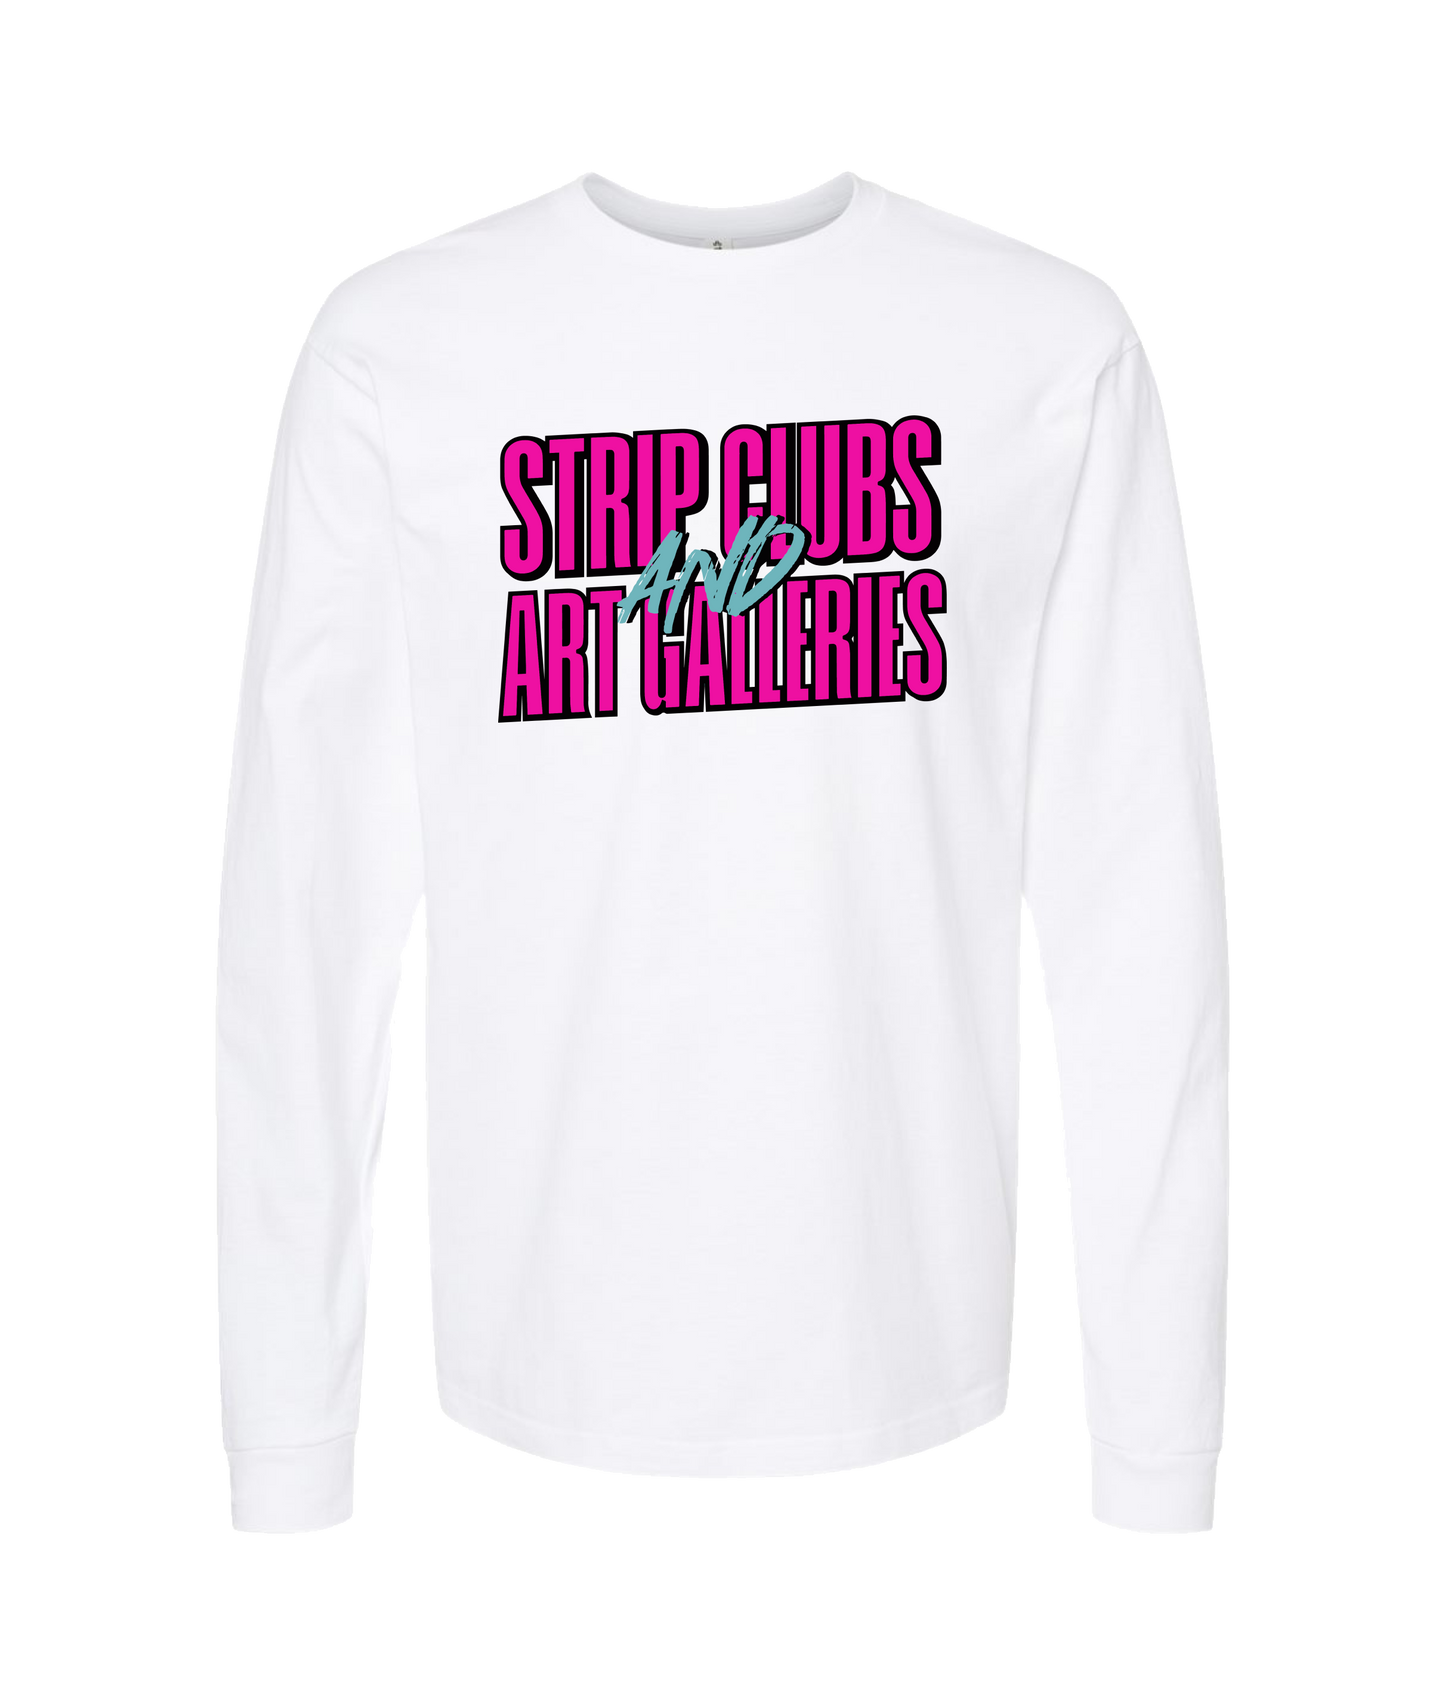 StripClubs and Art Galleries - Logo Tee - White Long Sleeve T